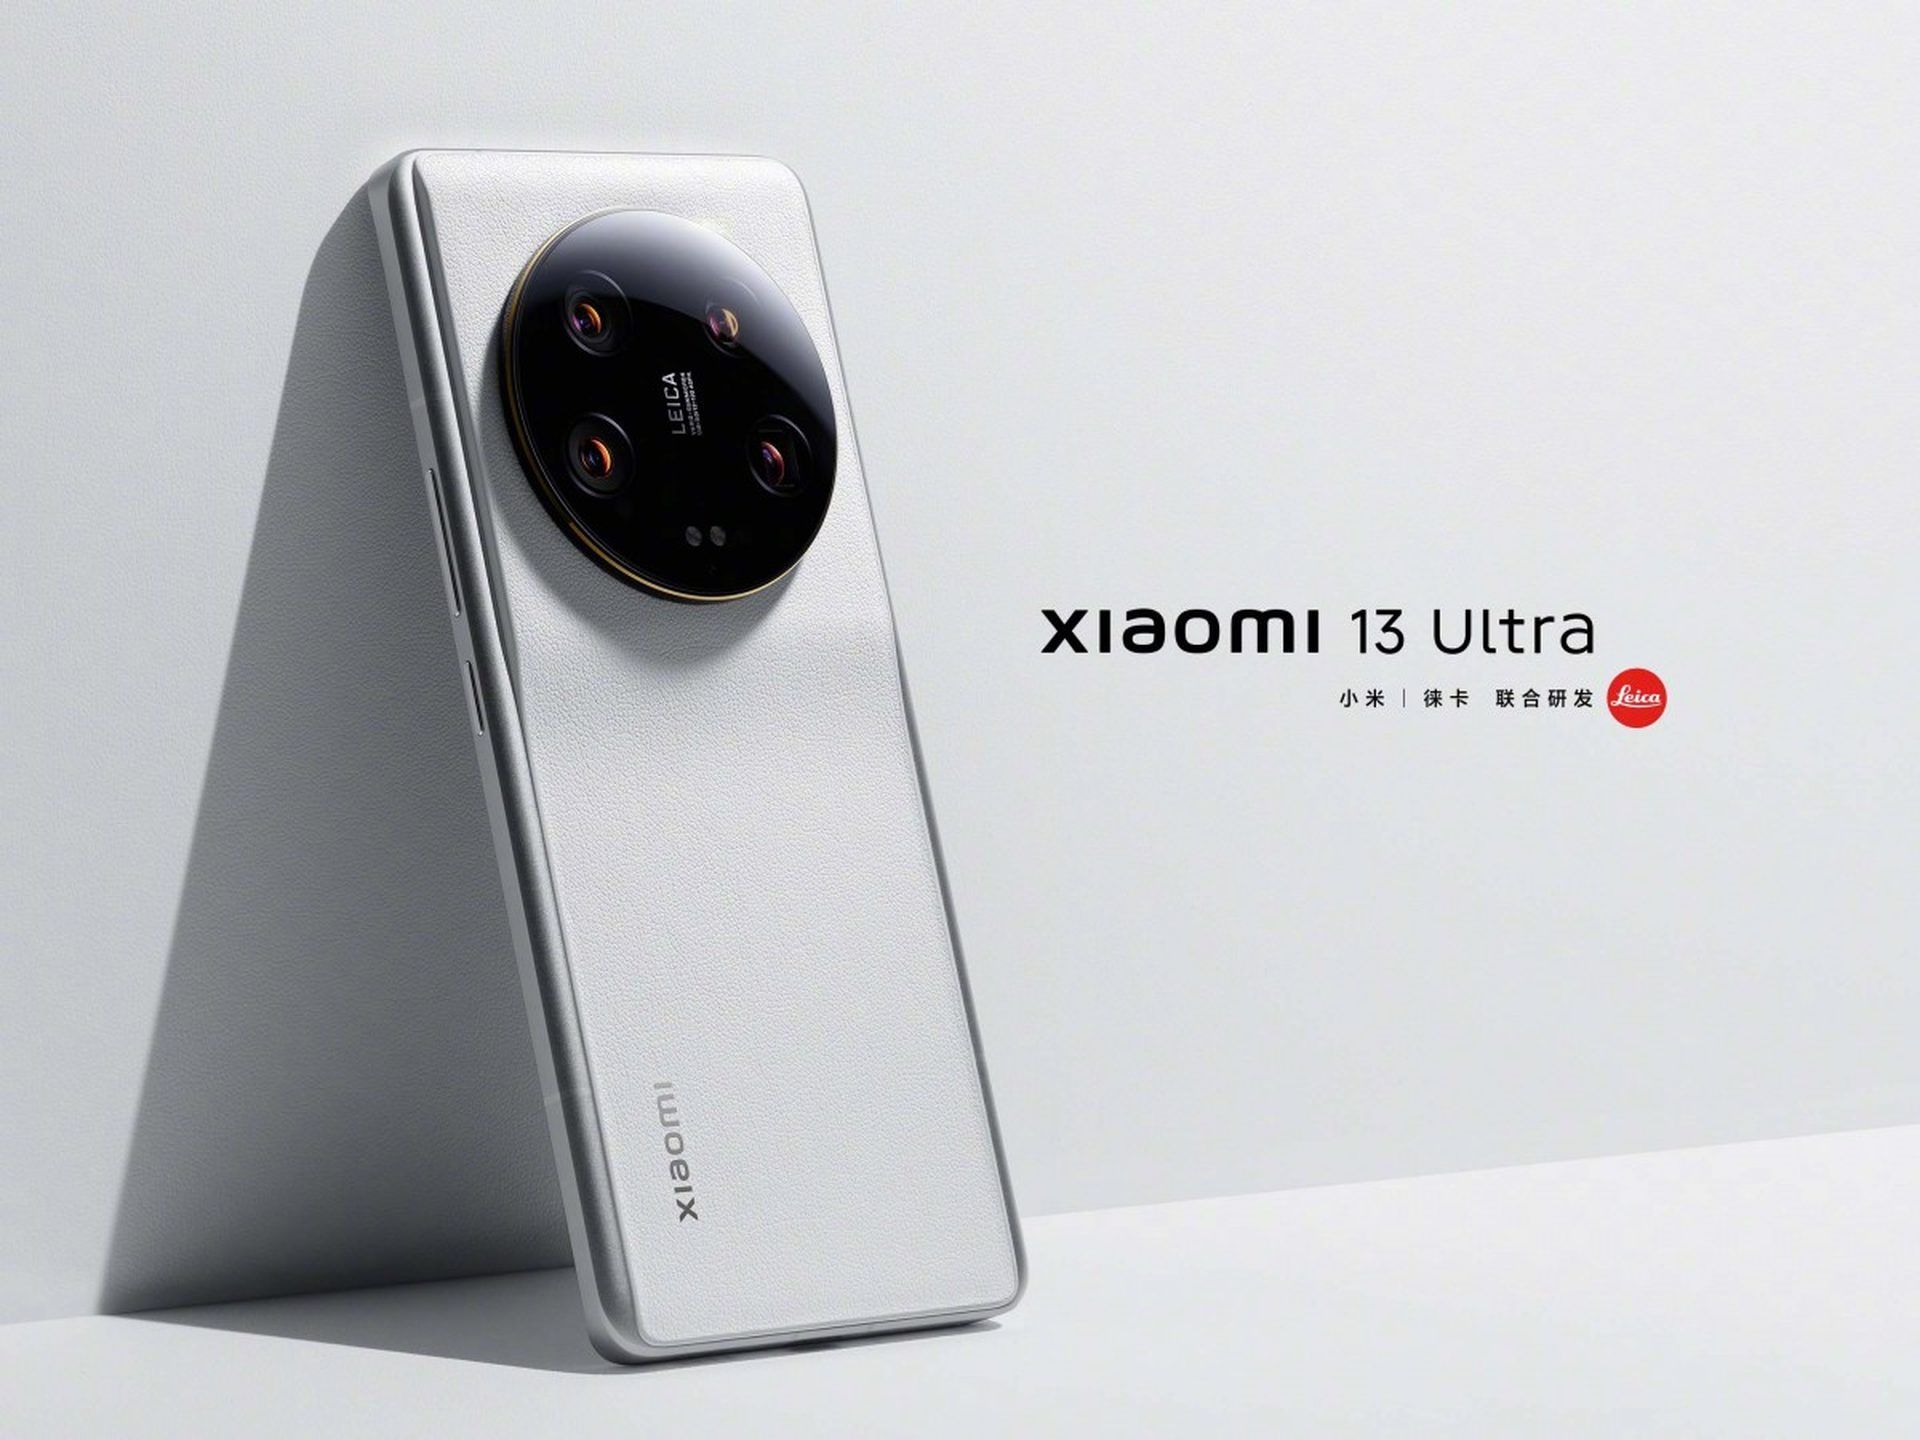 Xiaomi 13 Ultra: Specs, price, and release date